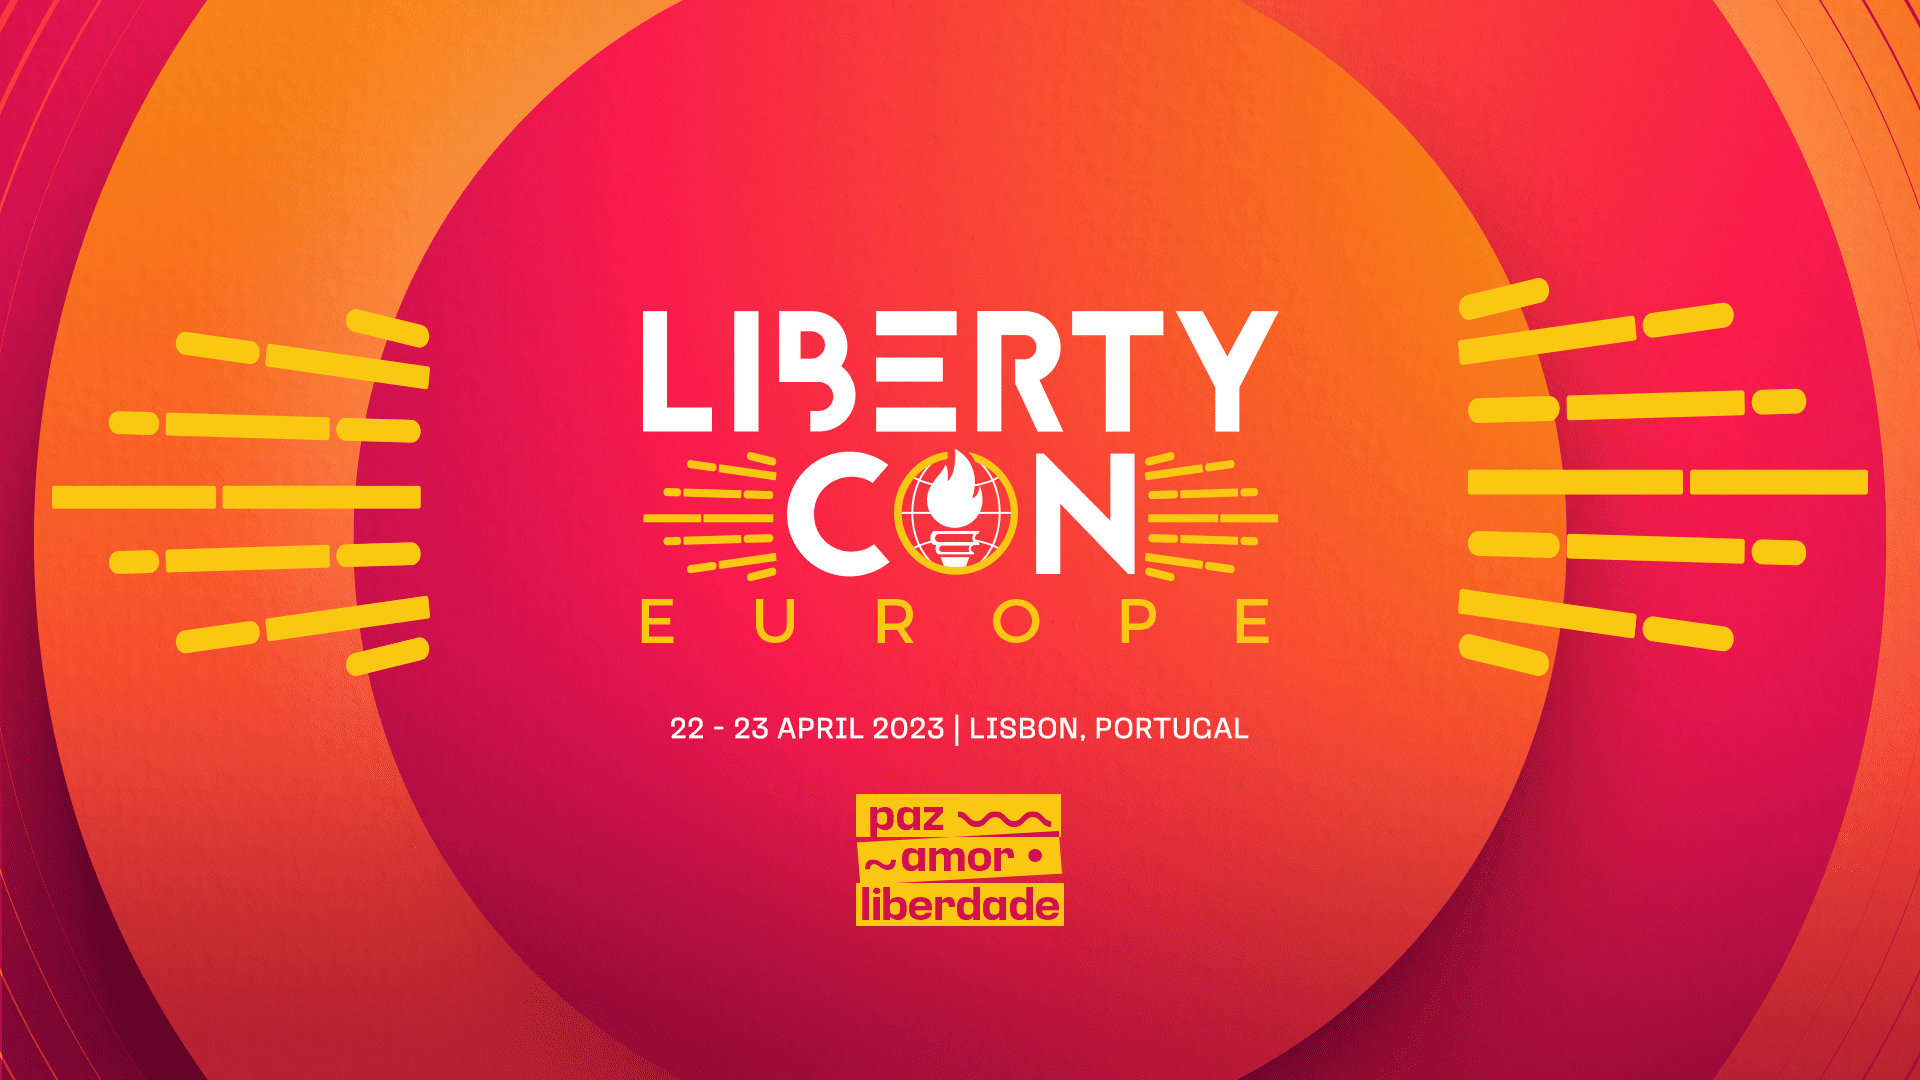 LibertyCon Europe, the continent’s largest annual pro-liberty gathering, is coming to Lisbon, Portugal, on April 22 - 23, 2023!